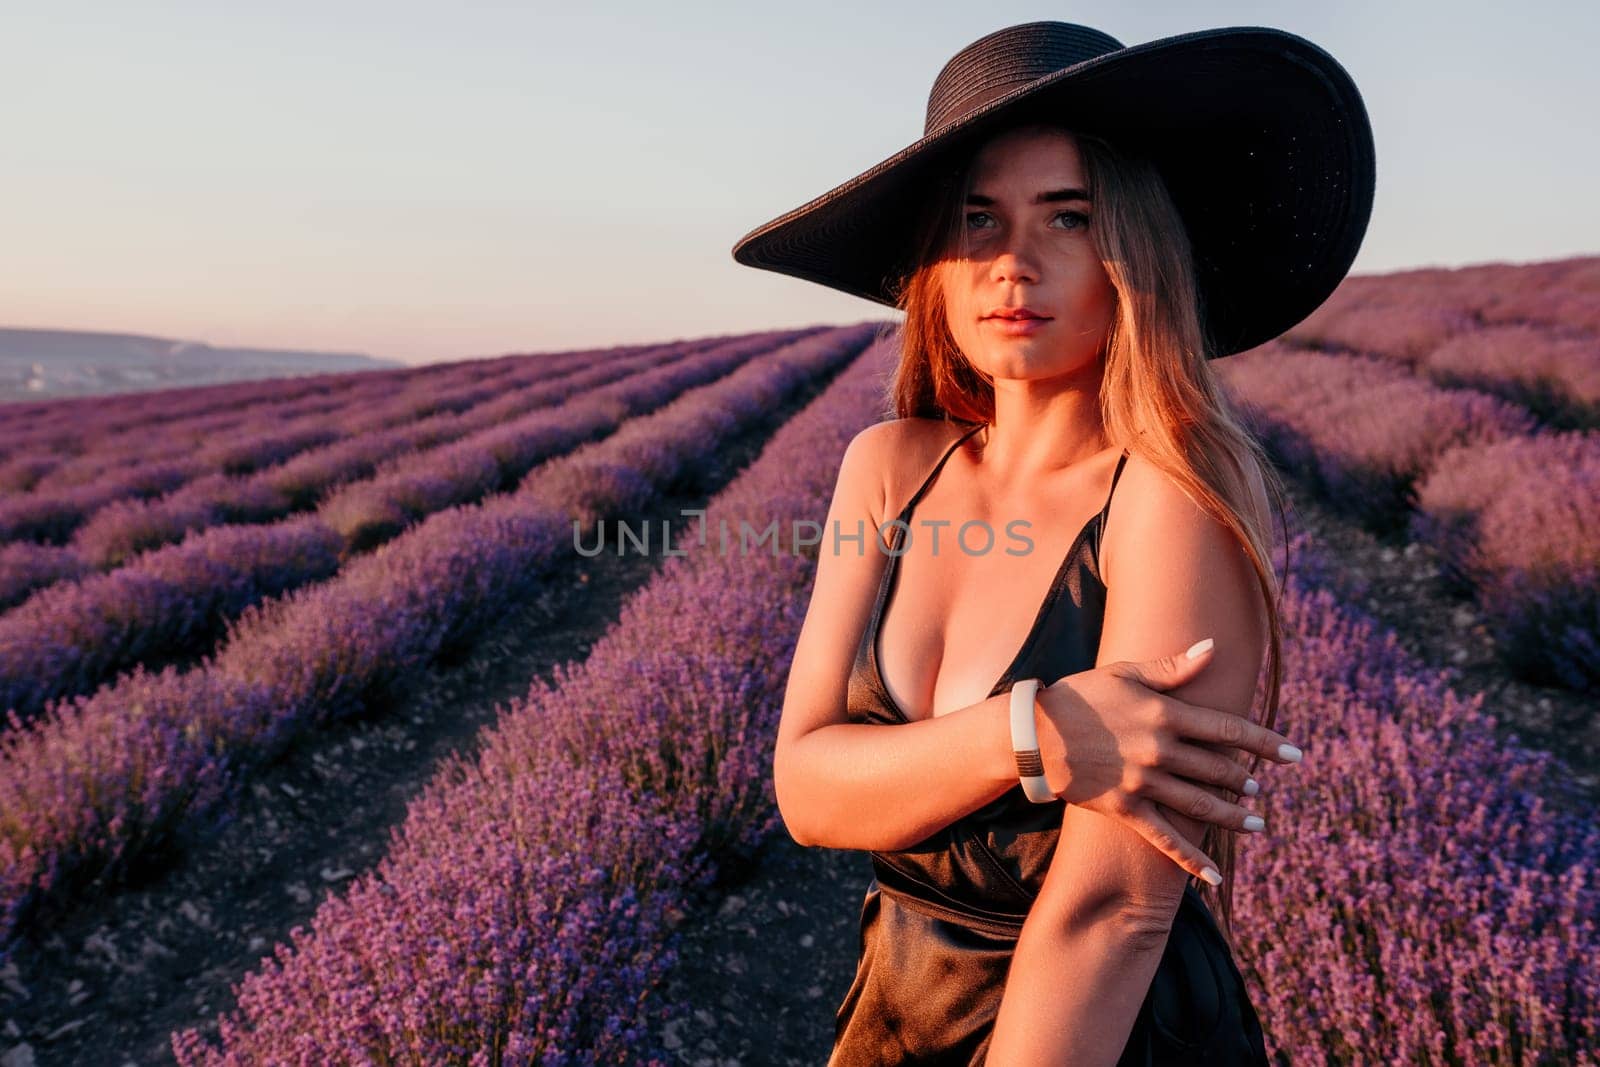 Woman lavender field. Happy carefree woman in black dress and hat with large brim walking in a lavender field during sunset. Perfect for inspirational and warm concepts in travel and wanderlust. by panophotograph